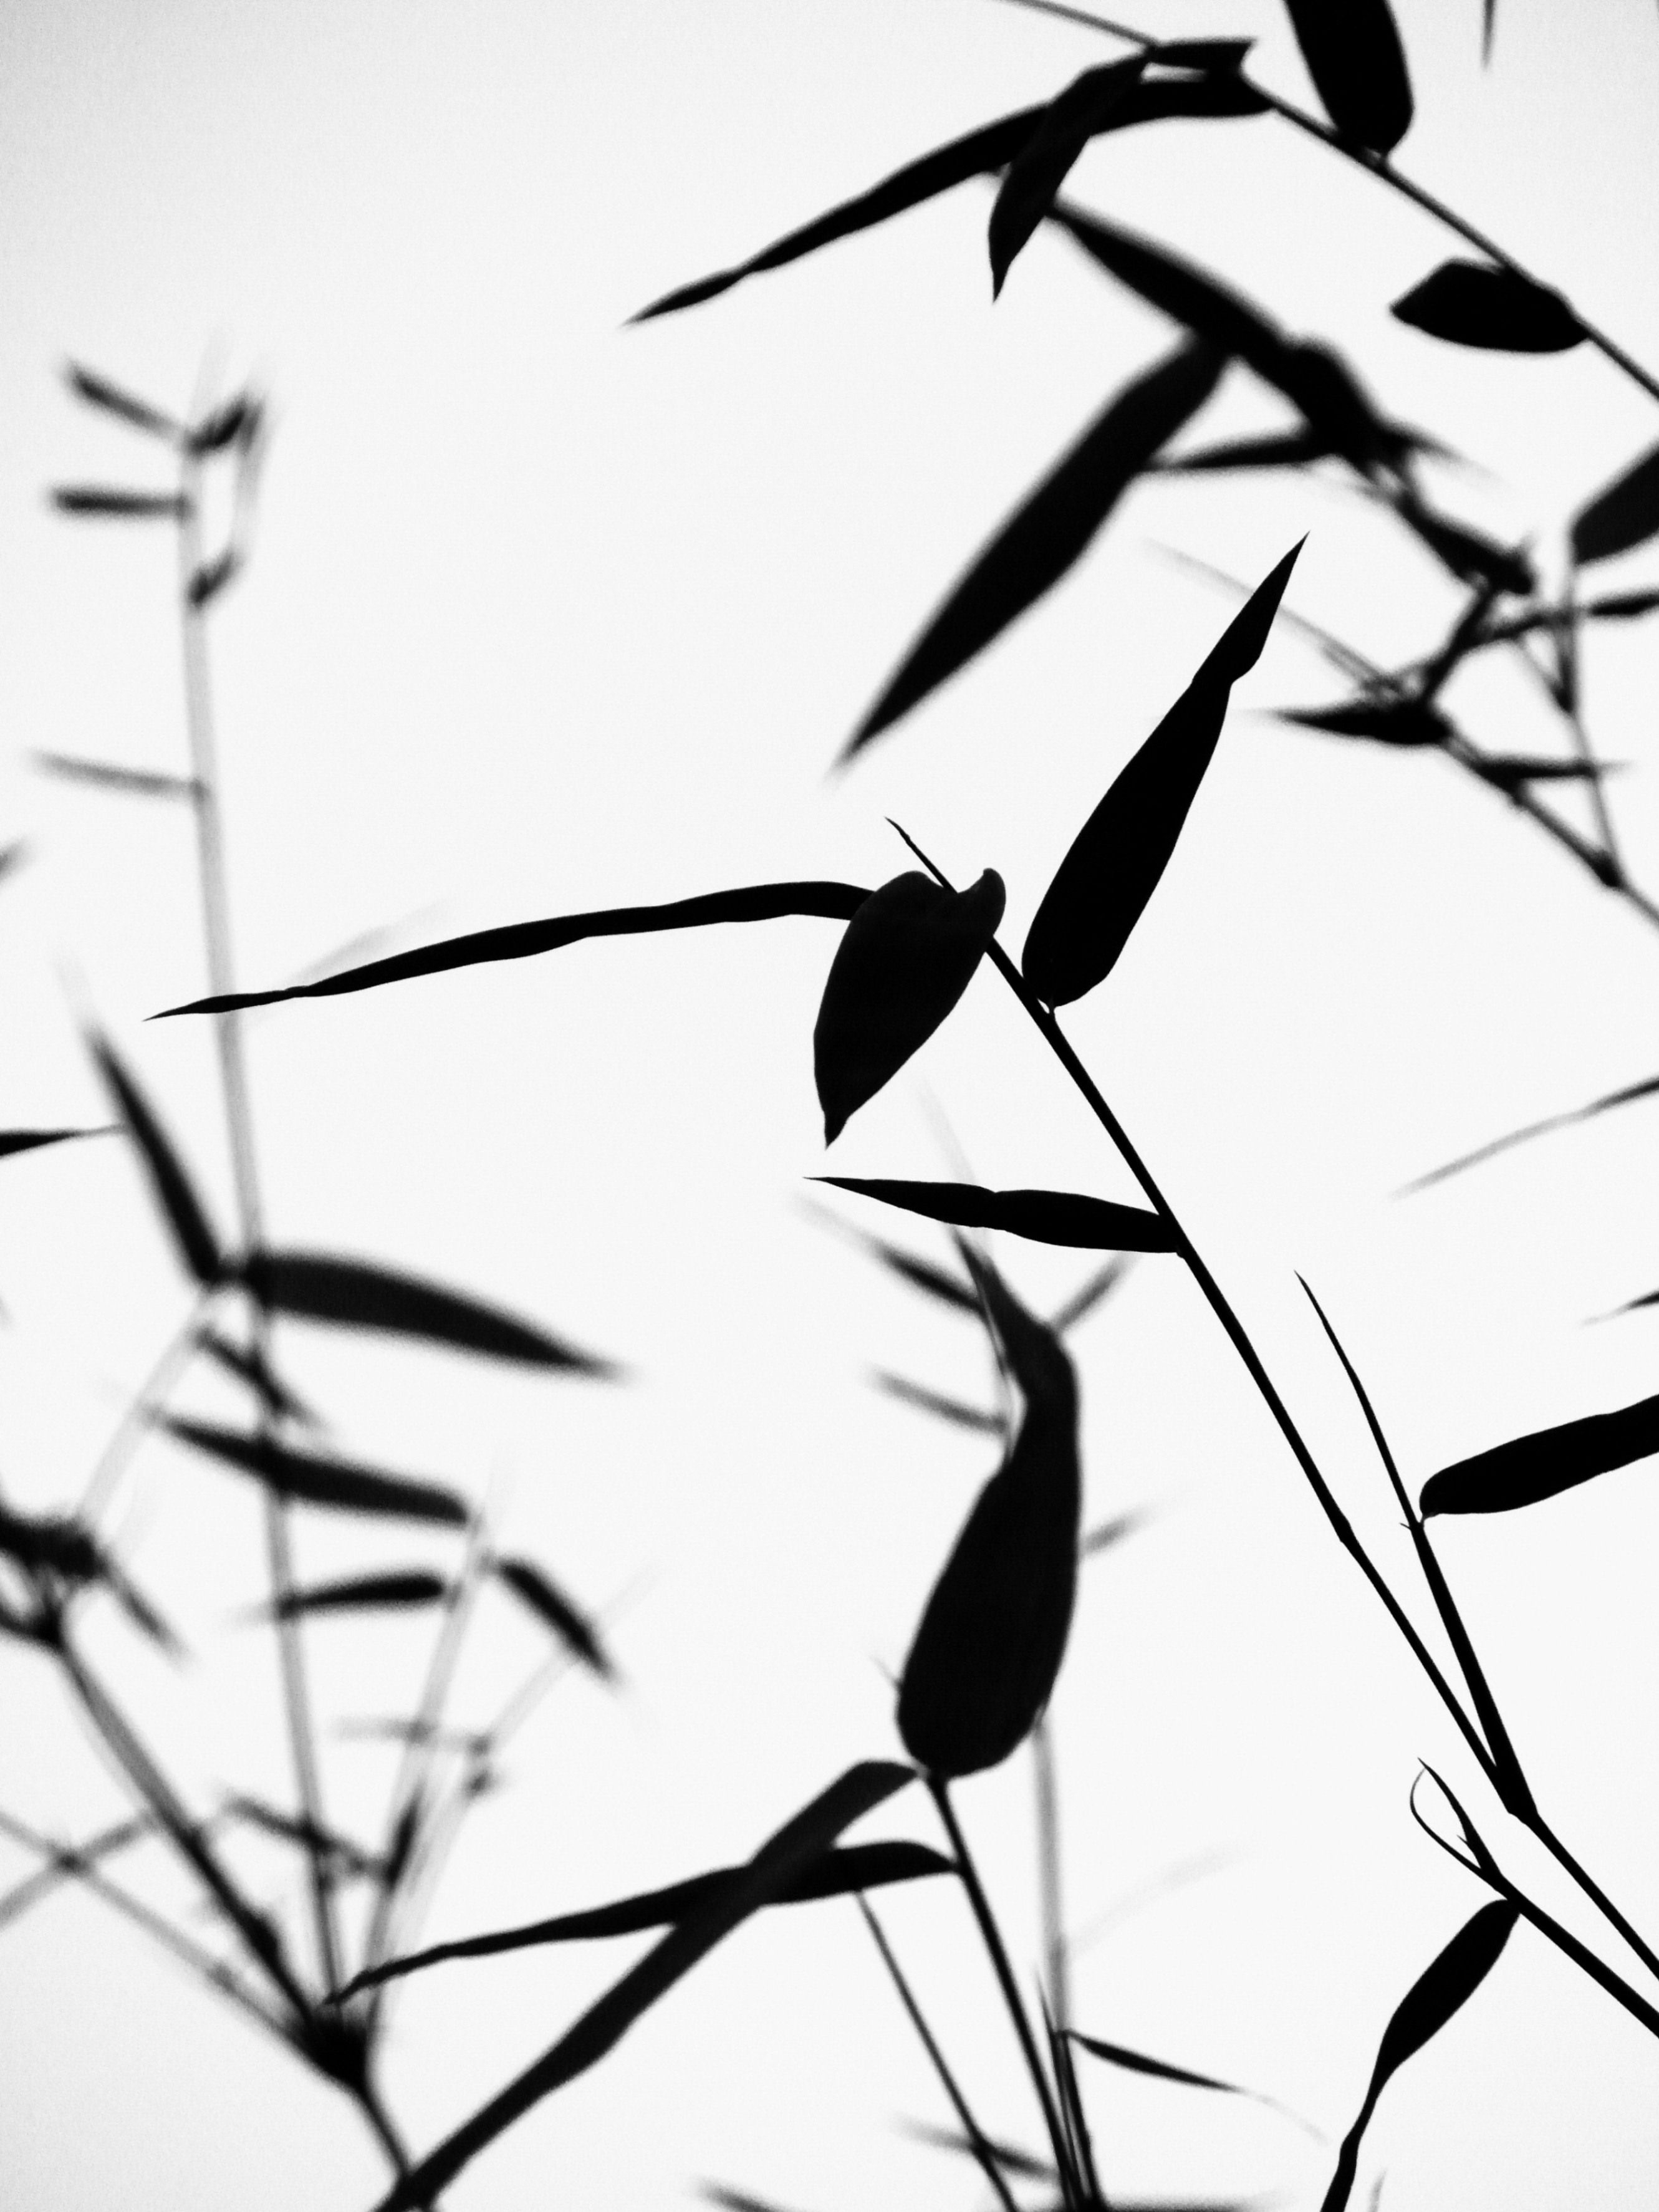 Bamboo leaves silhouette photo